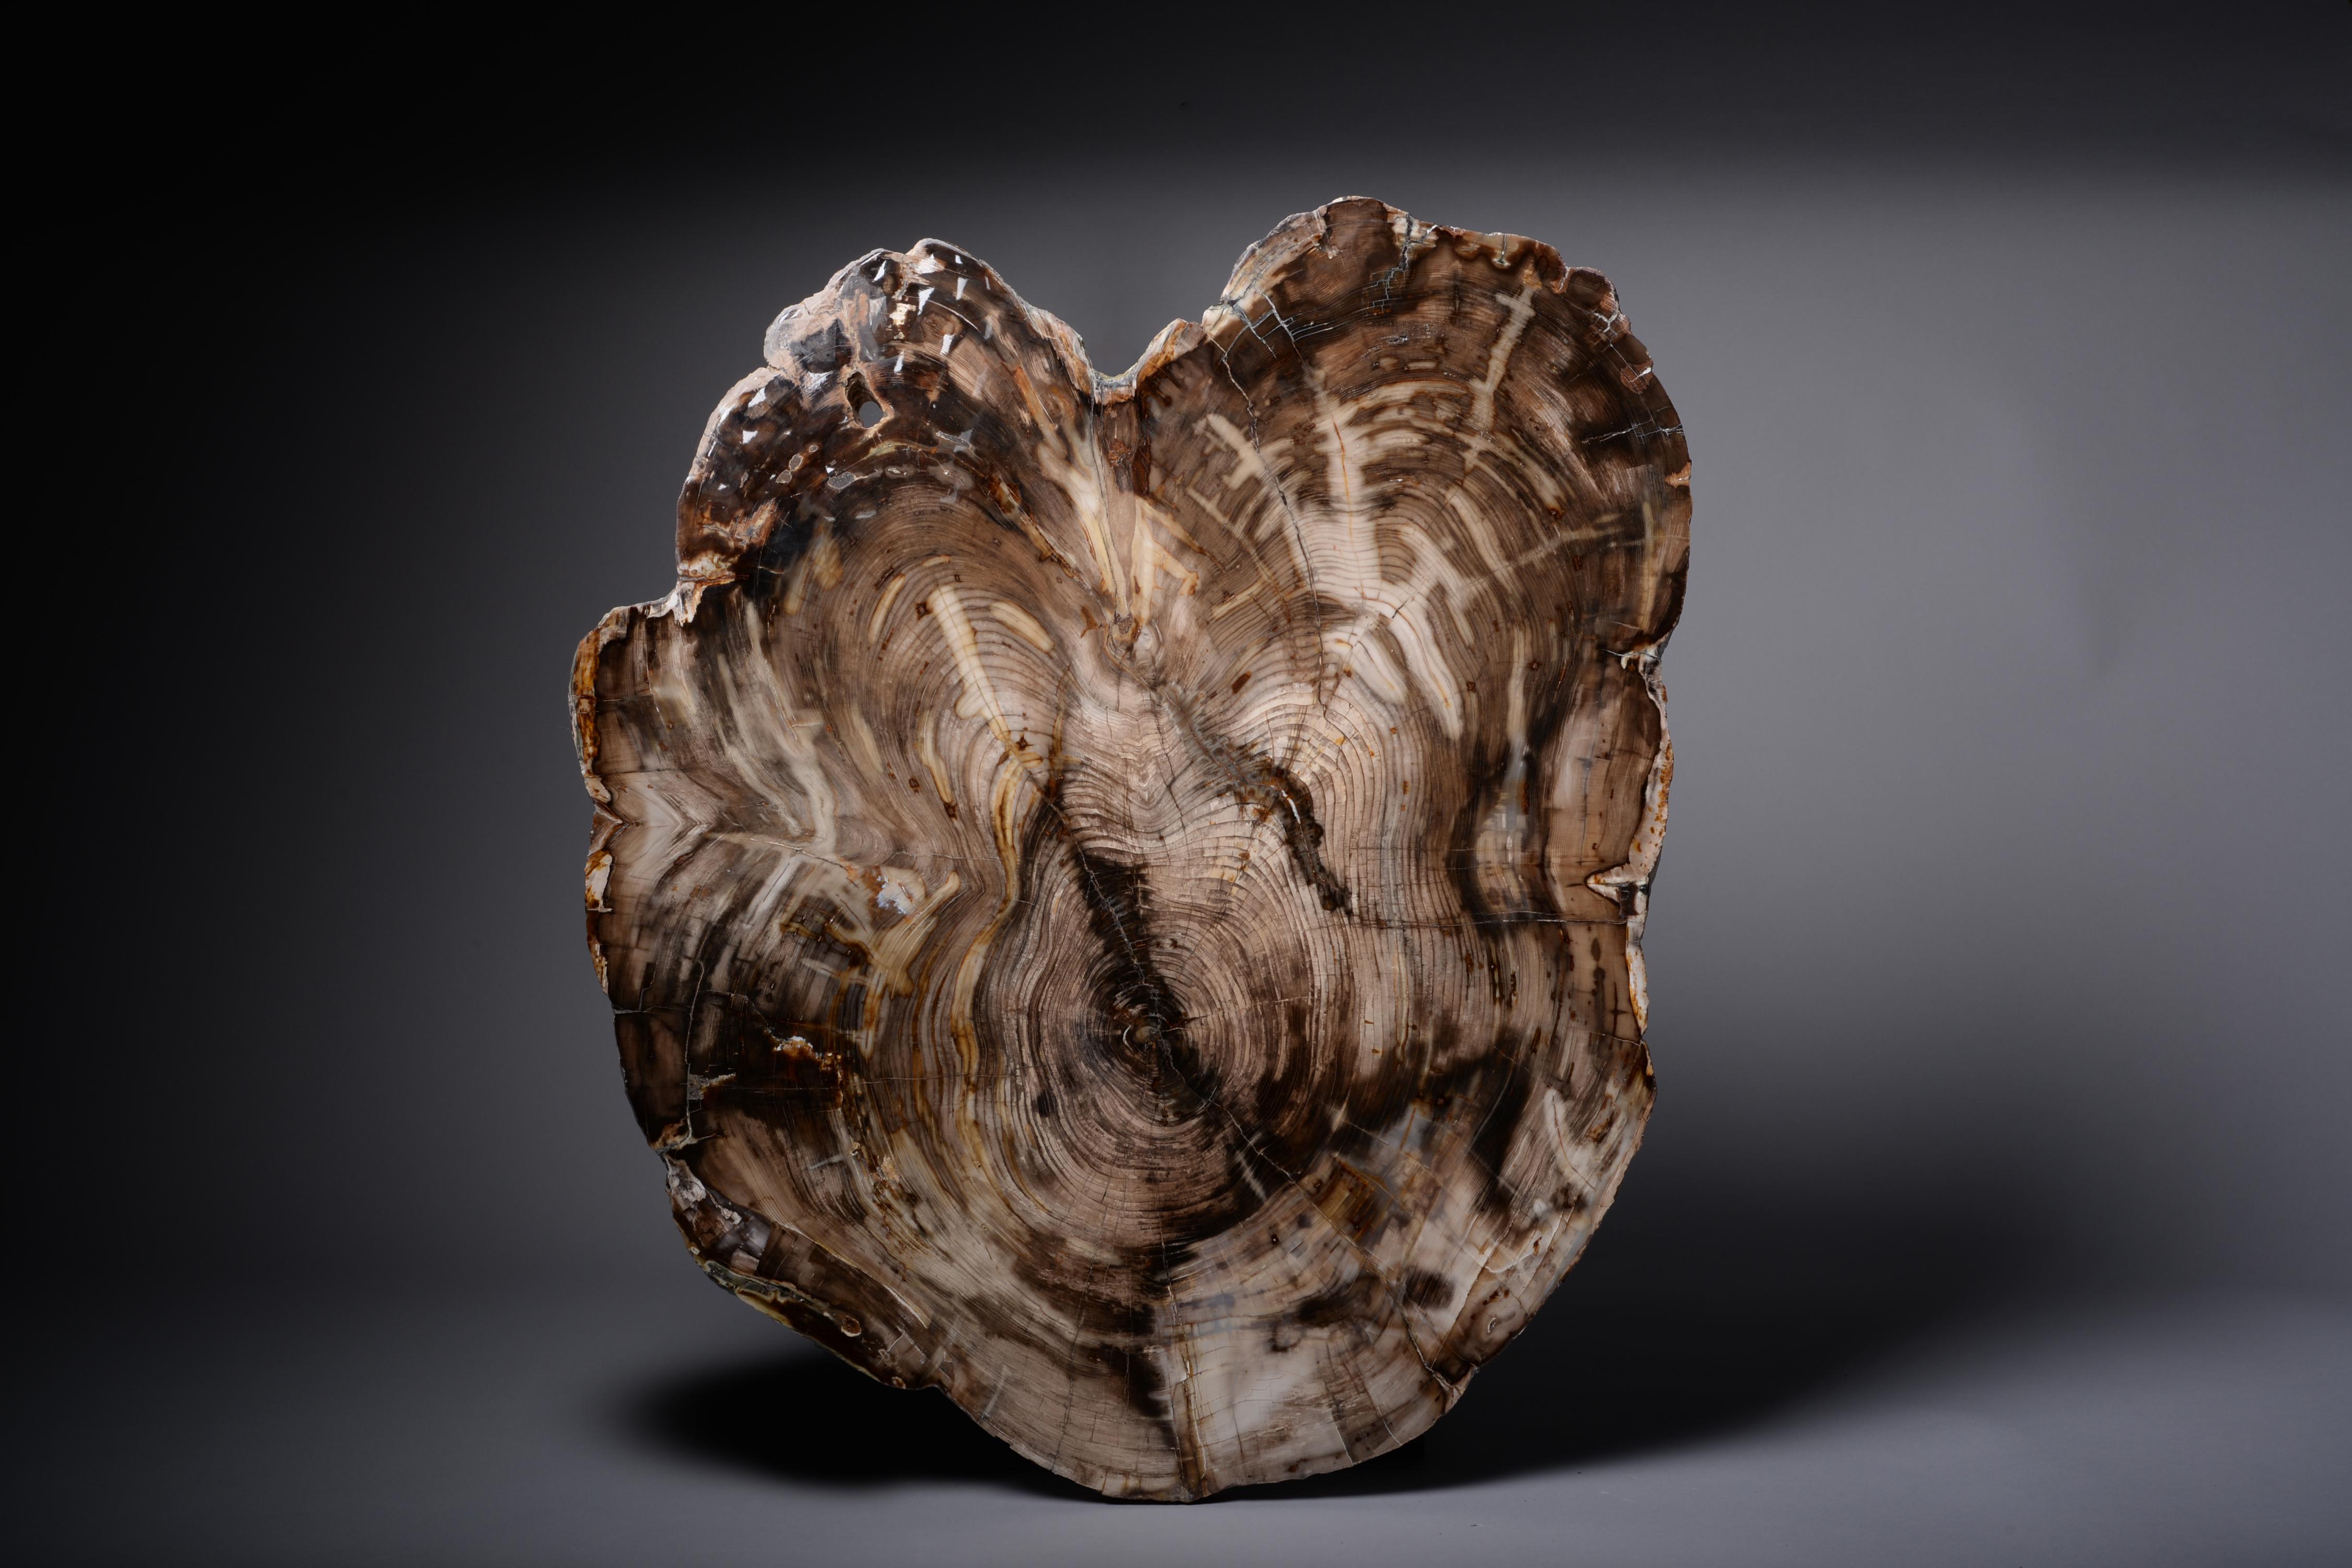 This spectacular cross section of petrified cedar wood comes from Saddle Mountain, Washington. It is remarkably large with a wonderful and highly aesthetic shape, exhibiting vibrant colours, beautifully preserved growth rings and a finely detailed